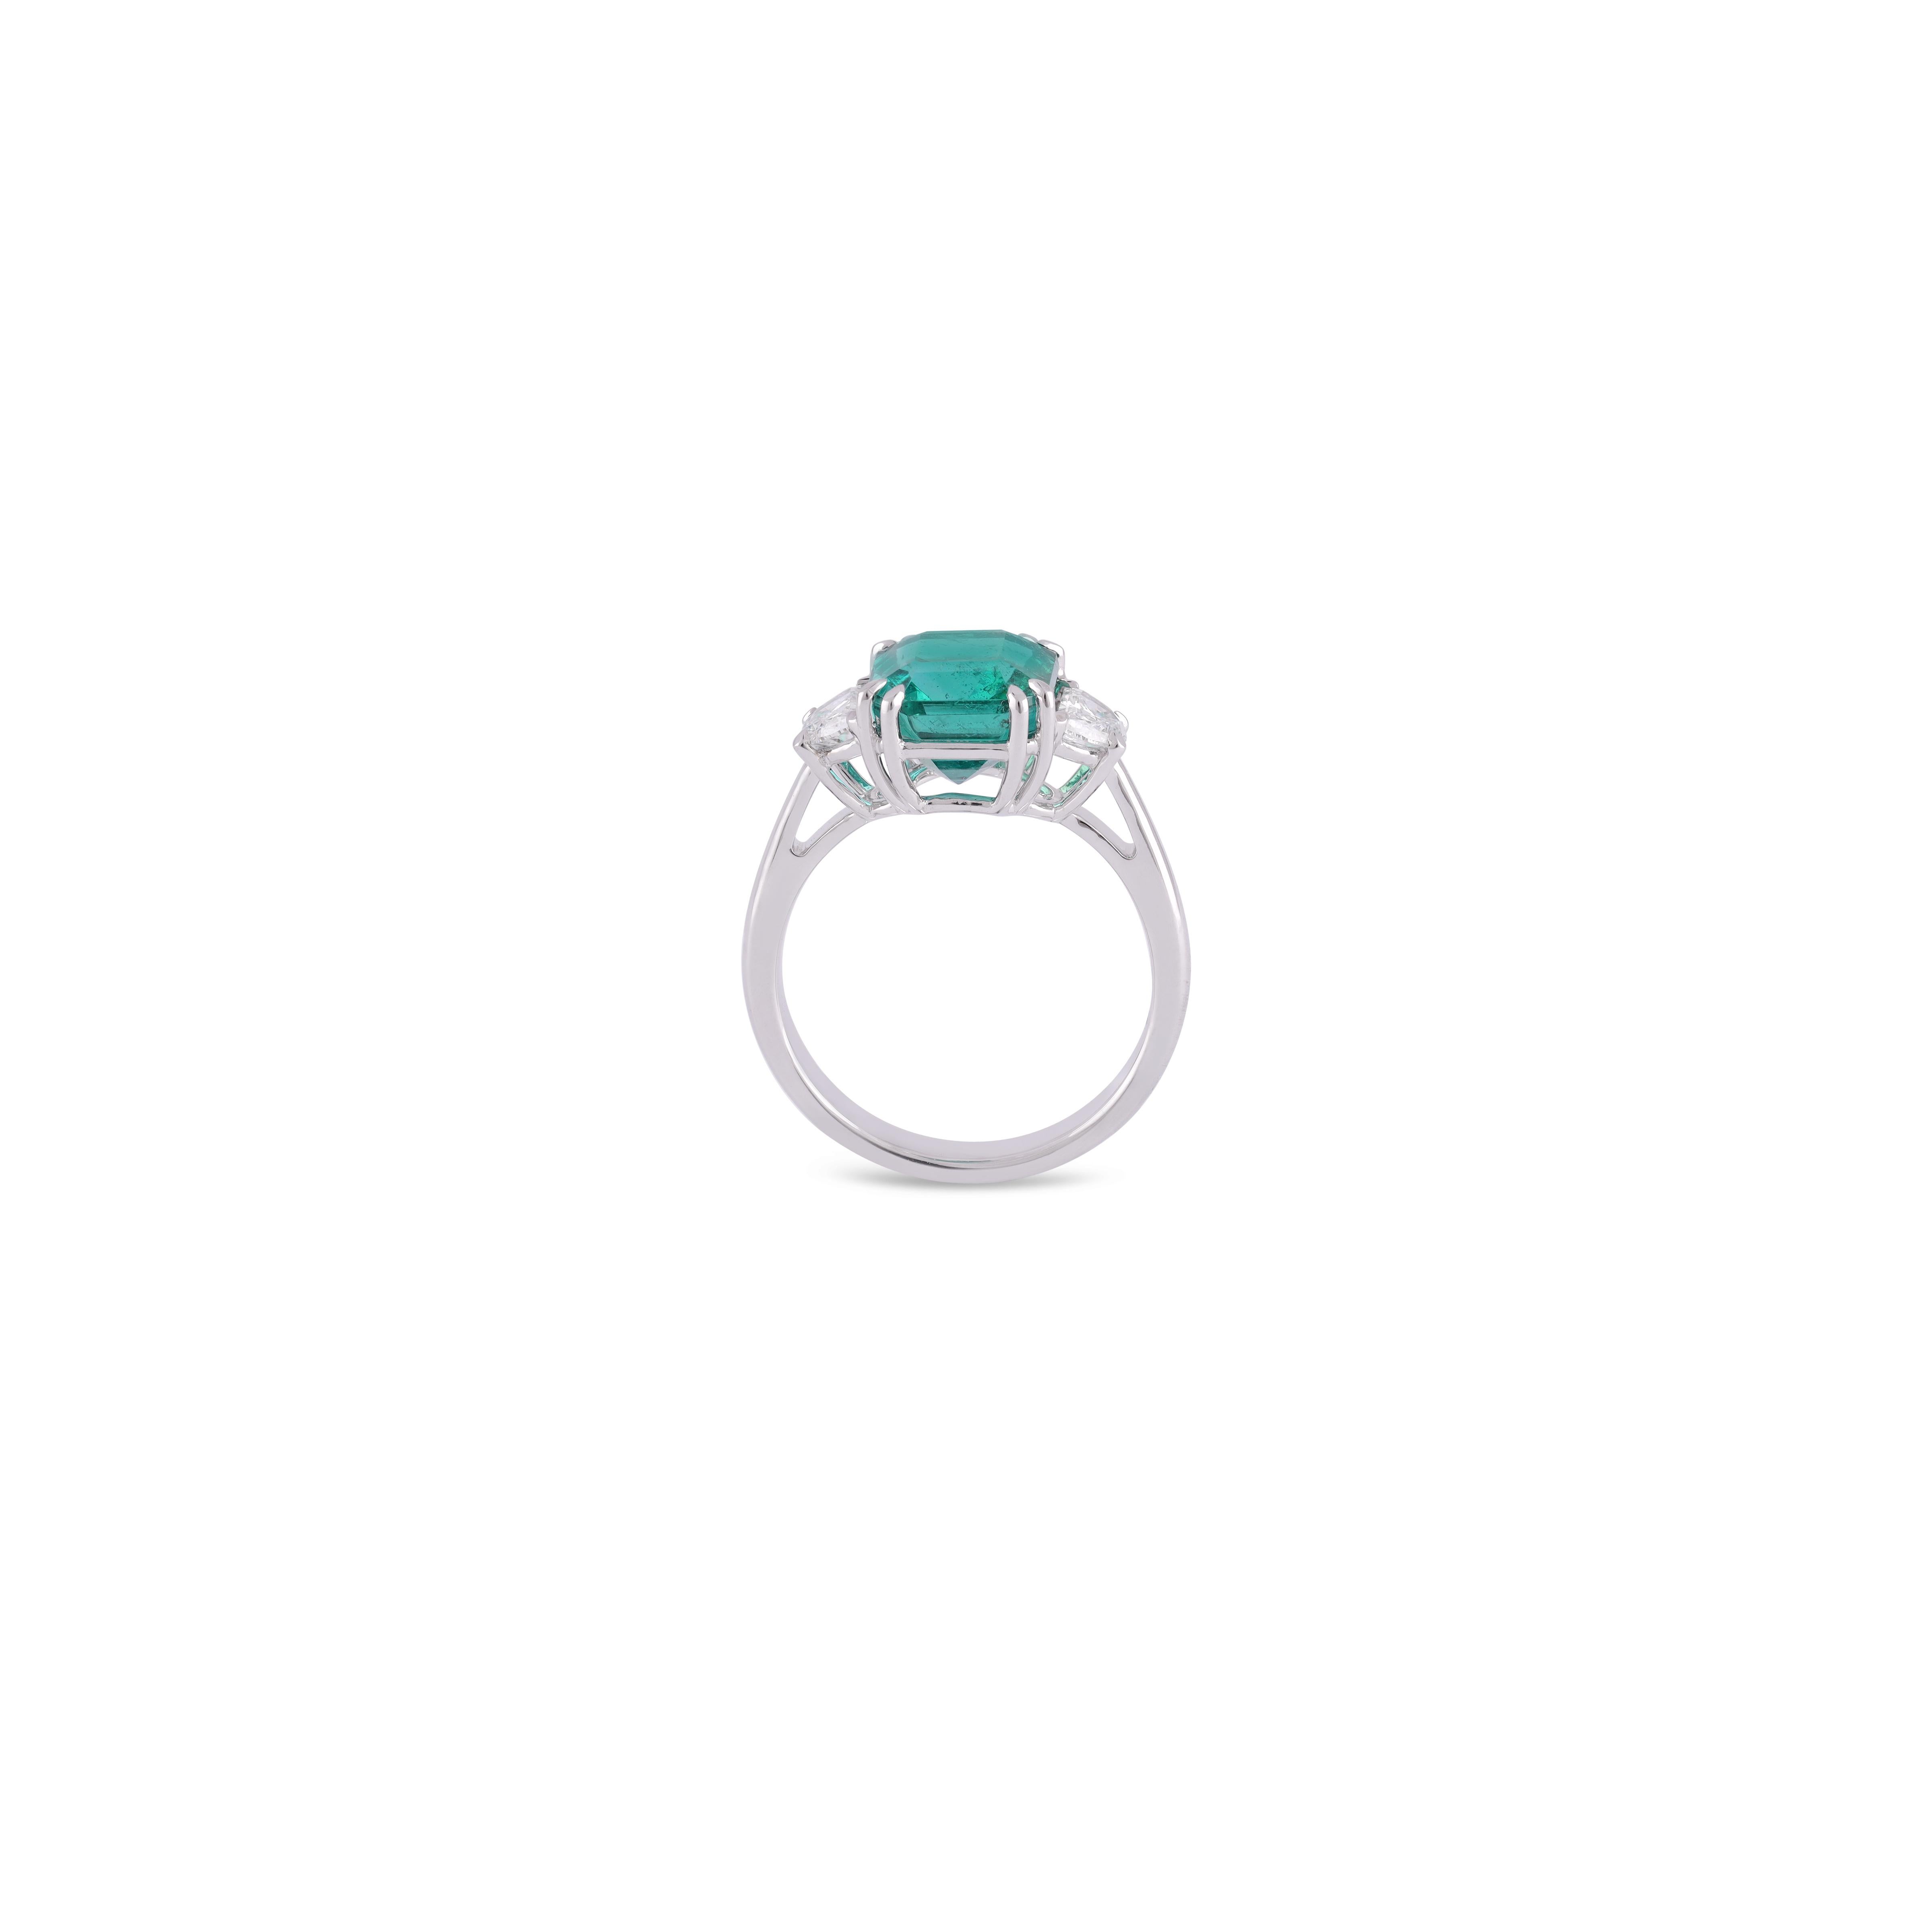 This is an elegant emerald & diamond ring studded in 18k gold with 1 piece of high  Zambian emerald weight 3.78 carat which is surrounded by 2 pieces of diamonds weight 0.58 carat, this entire ring studded in 18k White gold.
Apart of our carefully